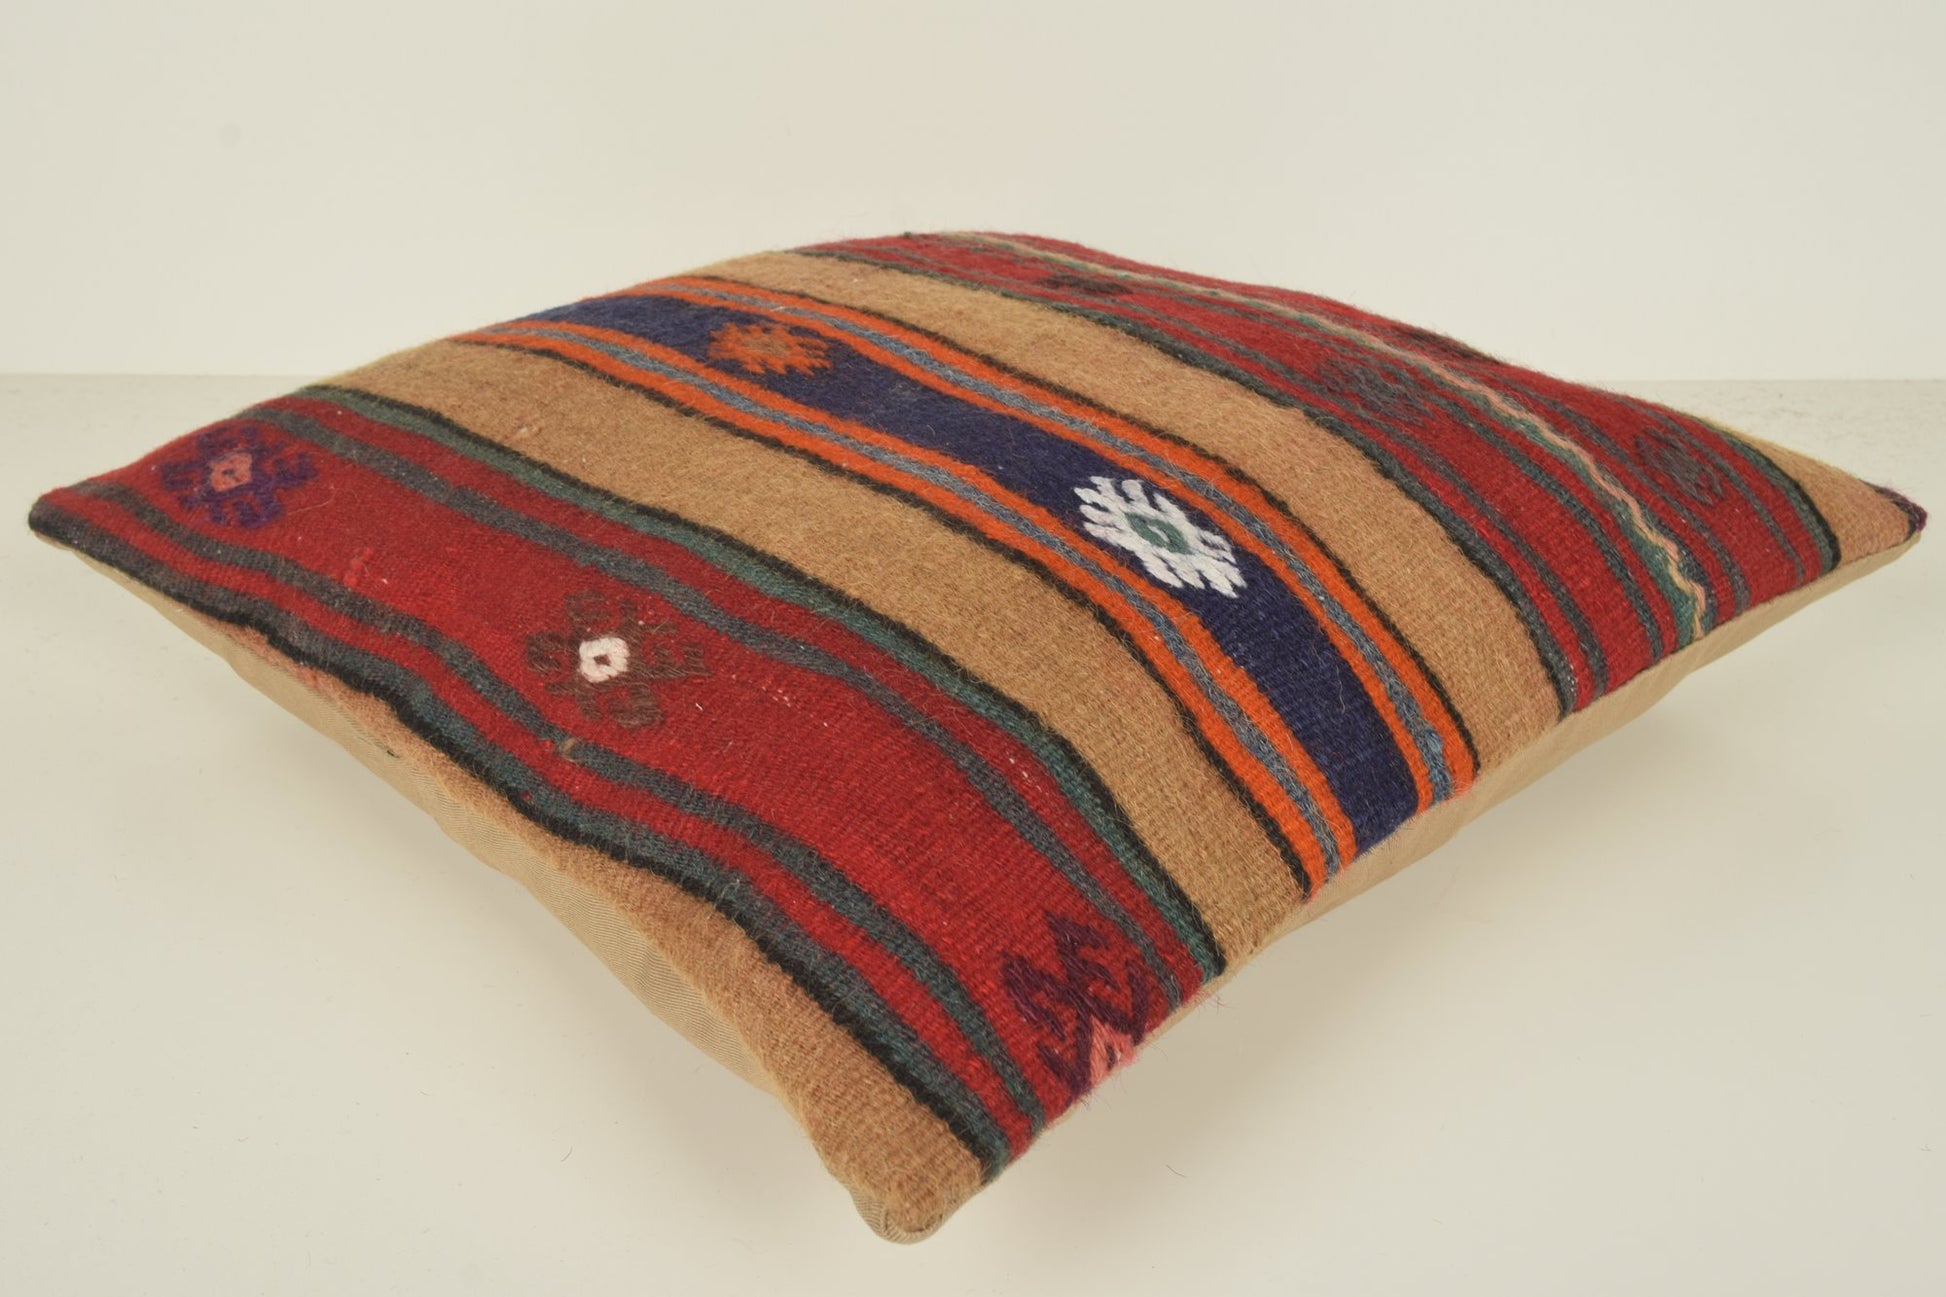 Kilim Pillow Covers made in Turkey C01346 18x18 Western Bedding Aztec